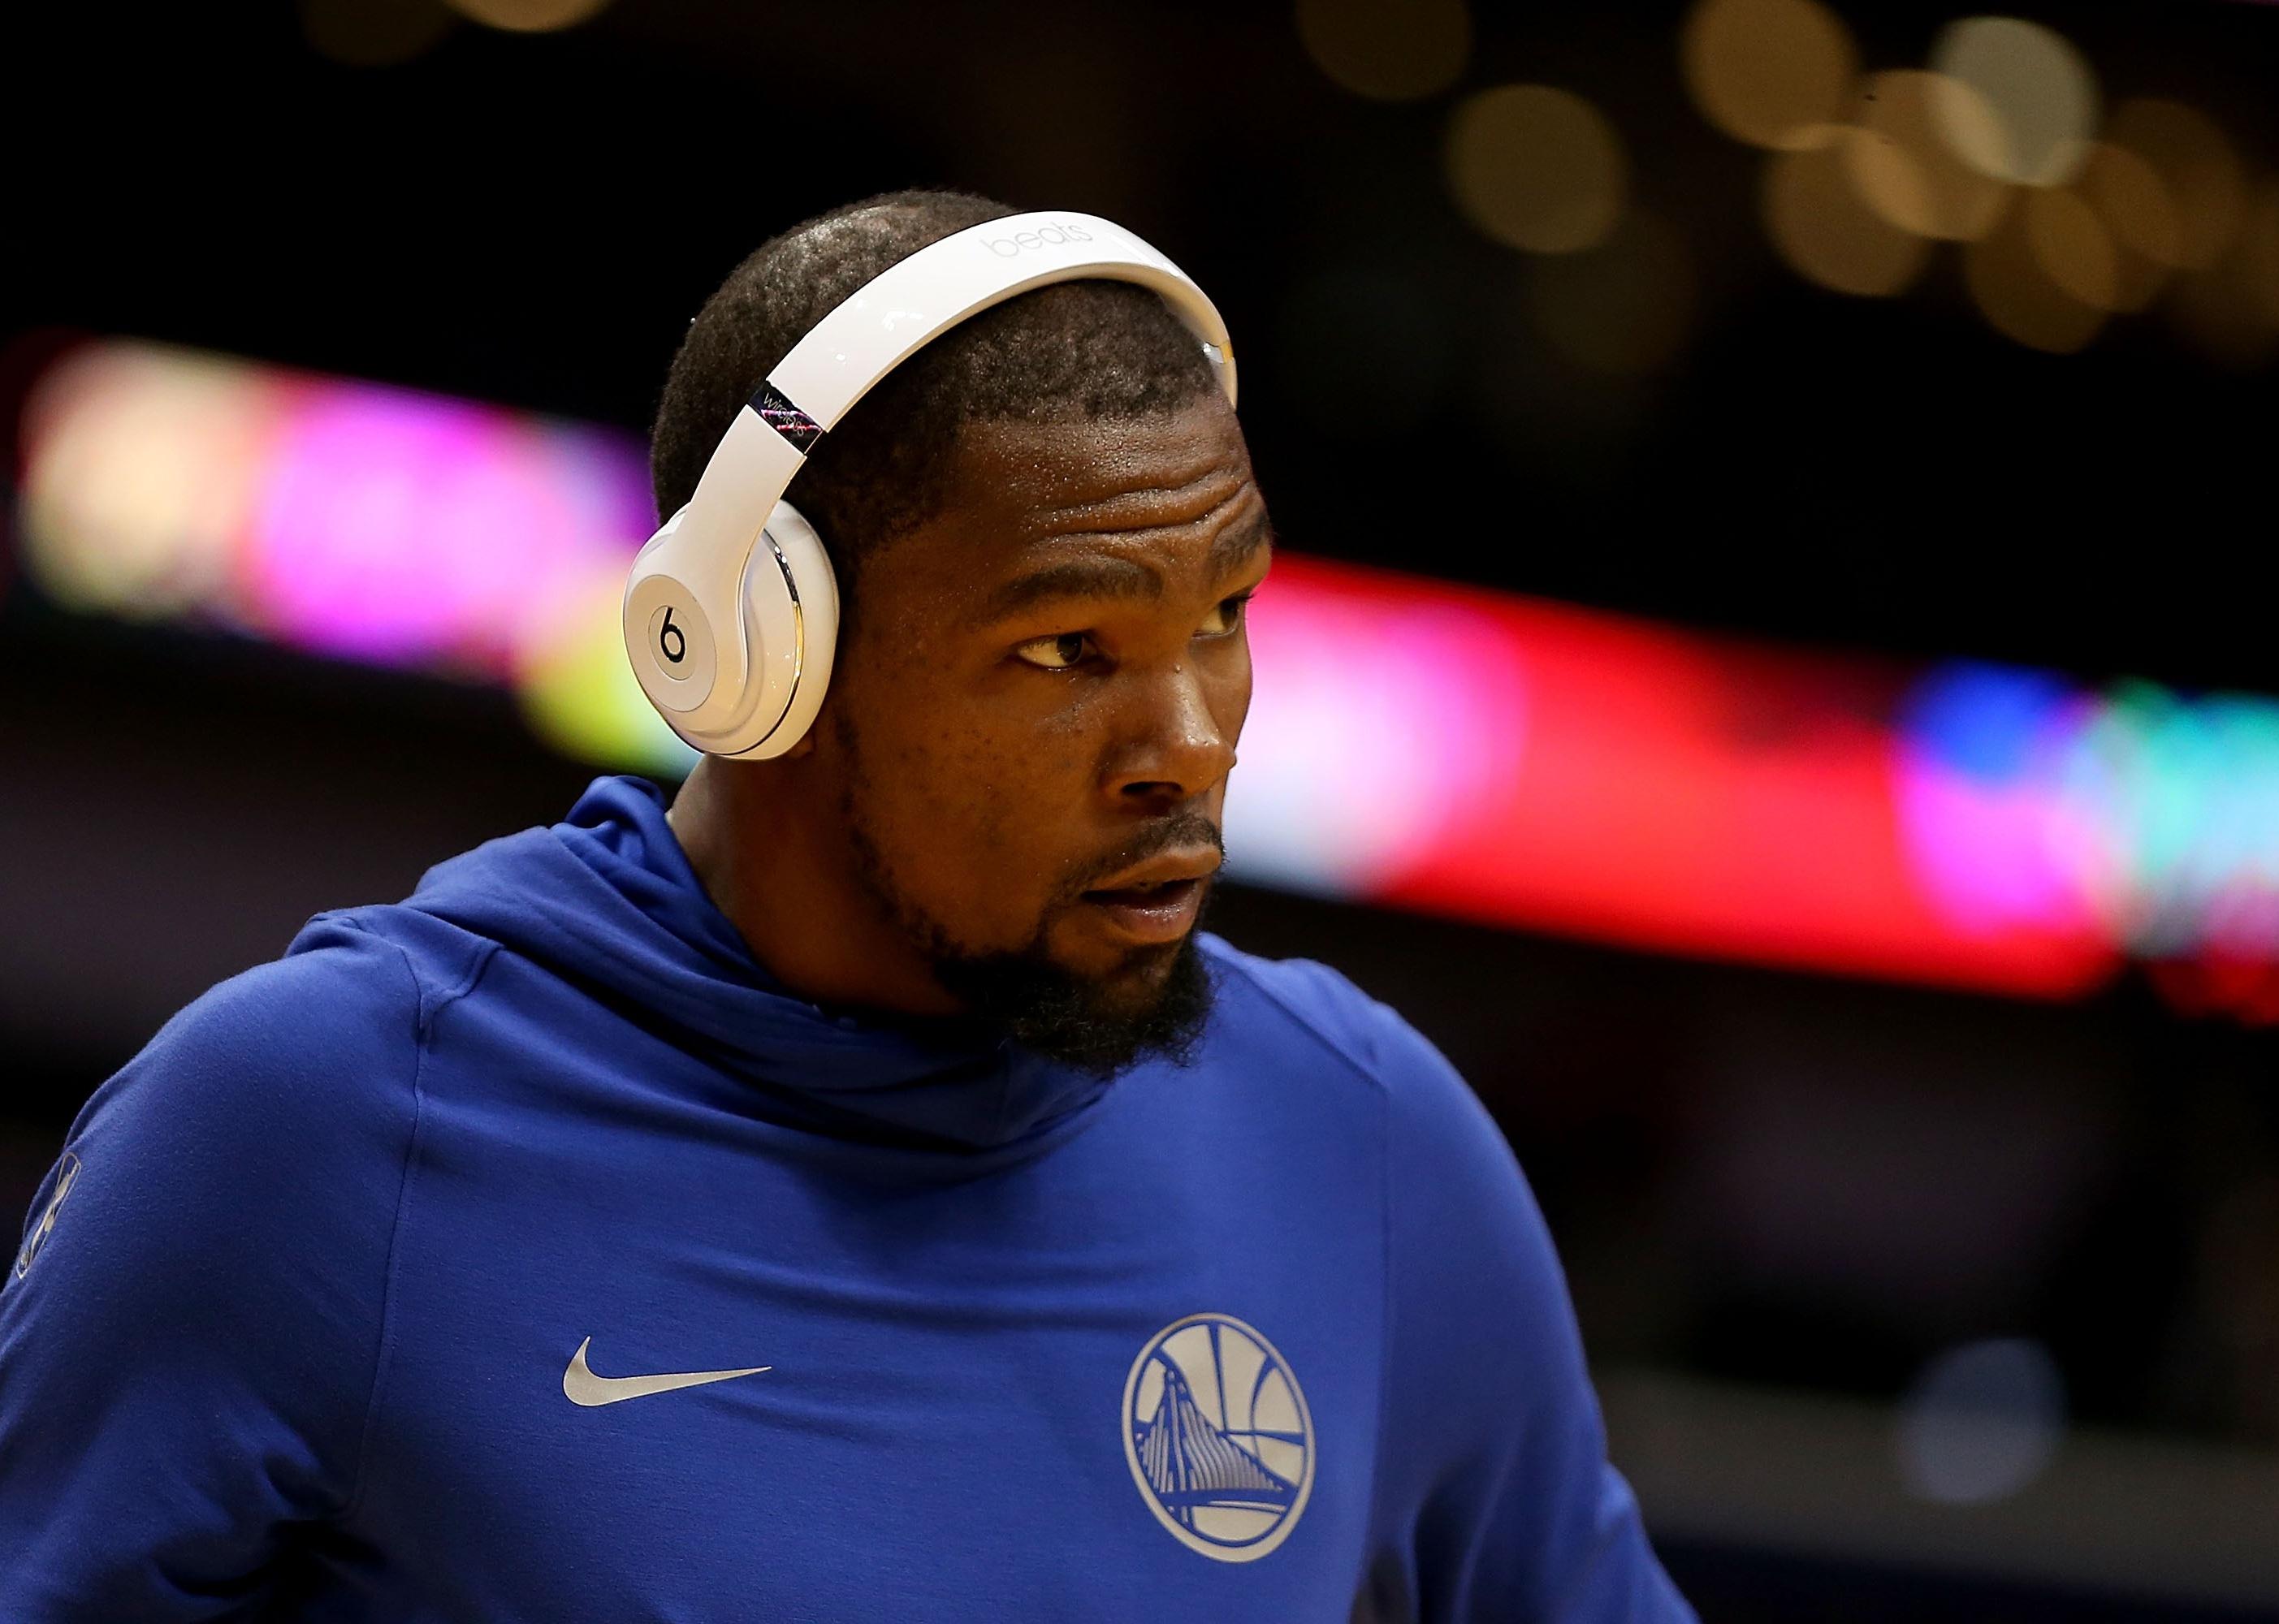 Kevin Durant of the Golden State Warriors wears a pair of Beats headphones.